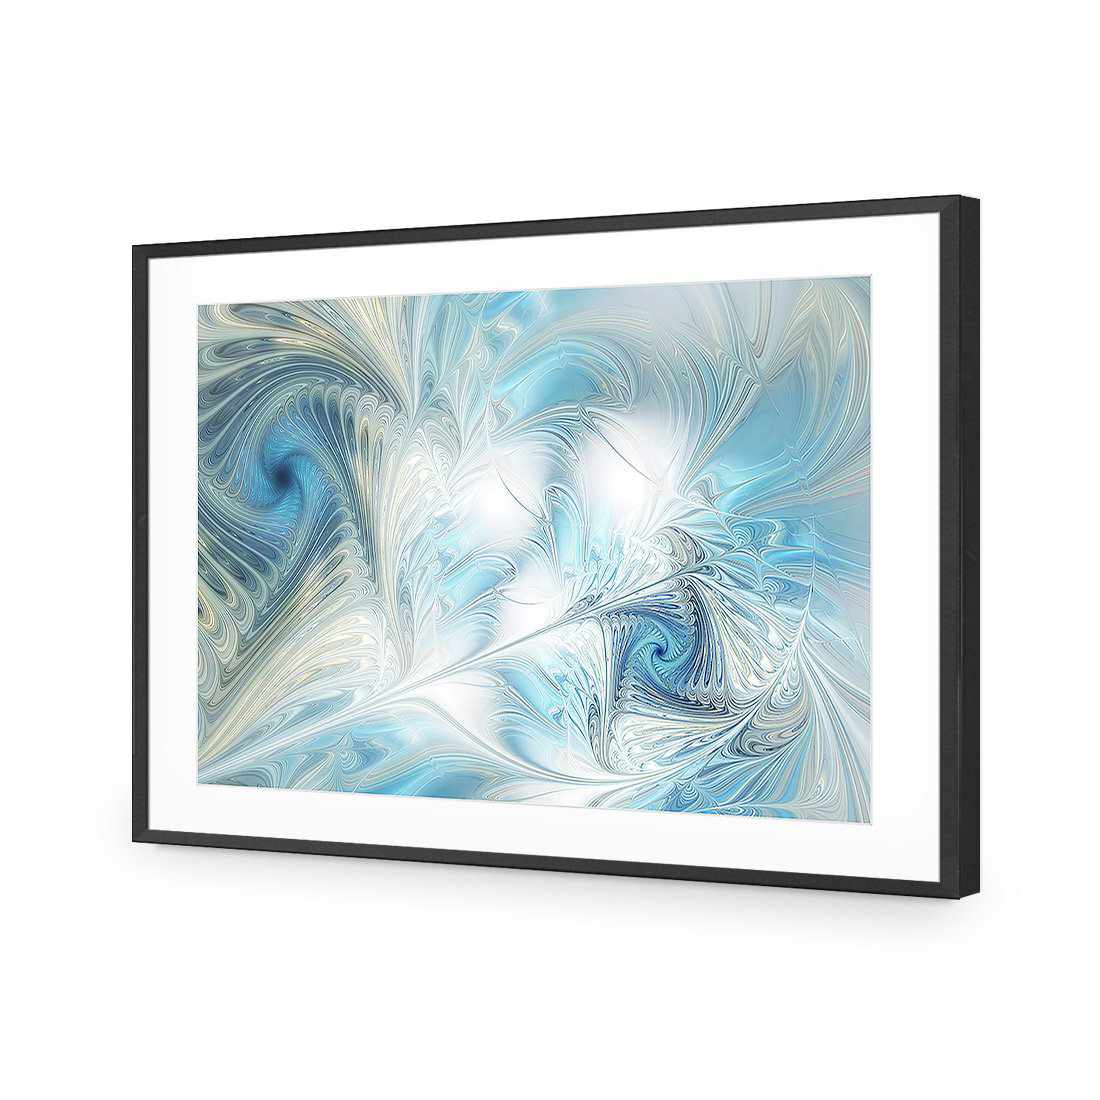 Travesty-Acrylic-Wall Art Design-With Border-Acrylic - Black Frame-45x30cm-Wall Art Designs